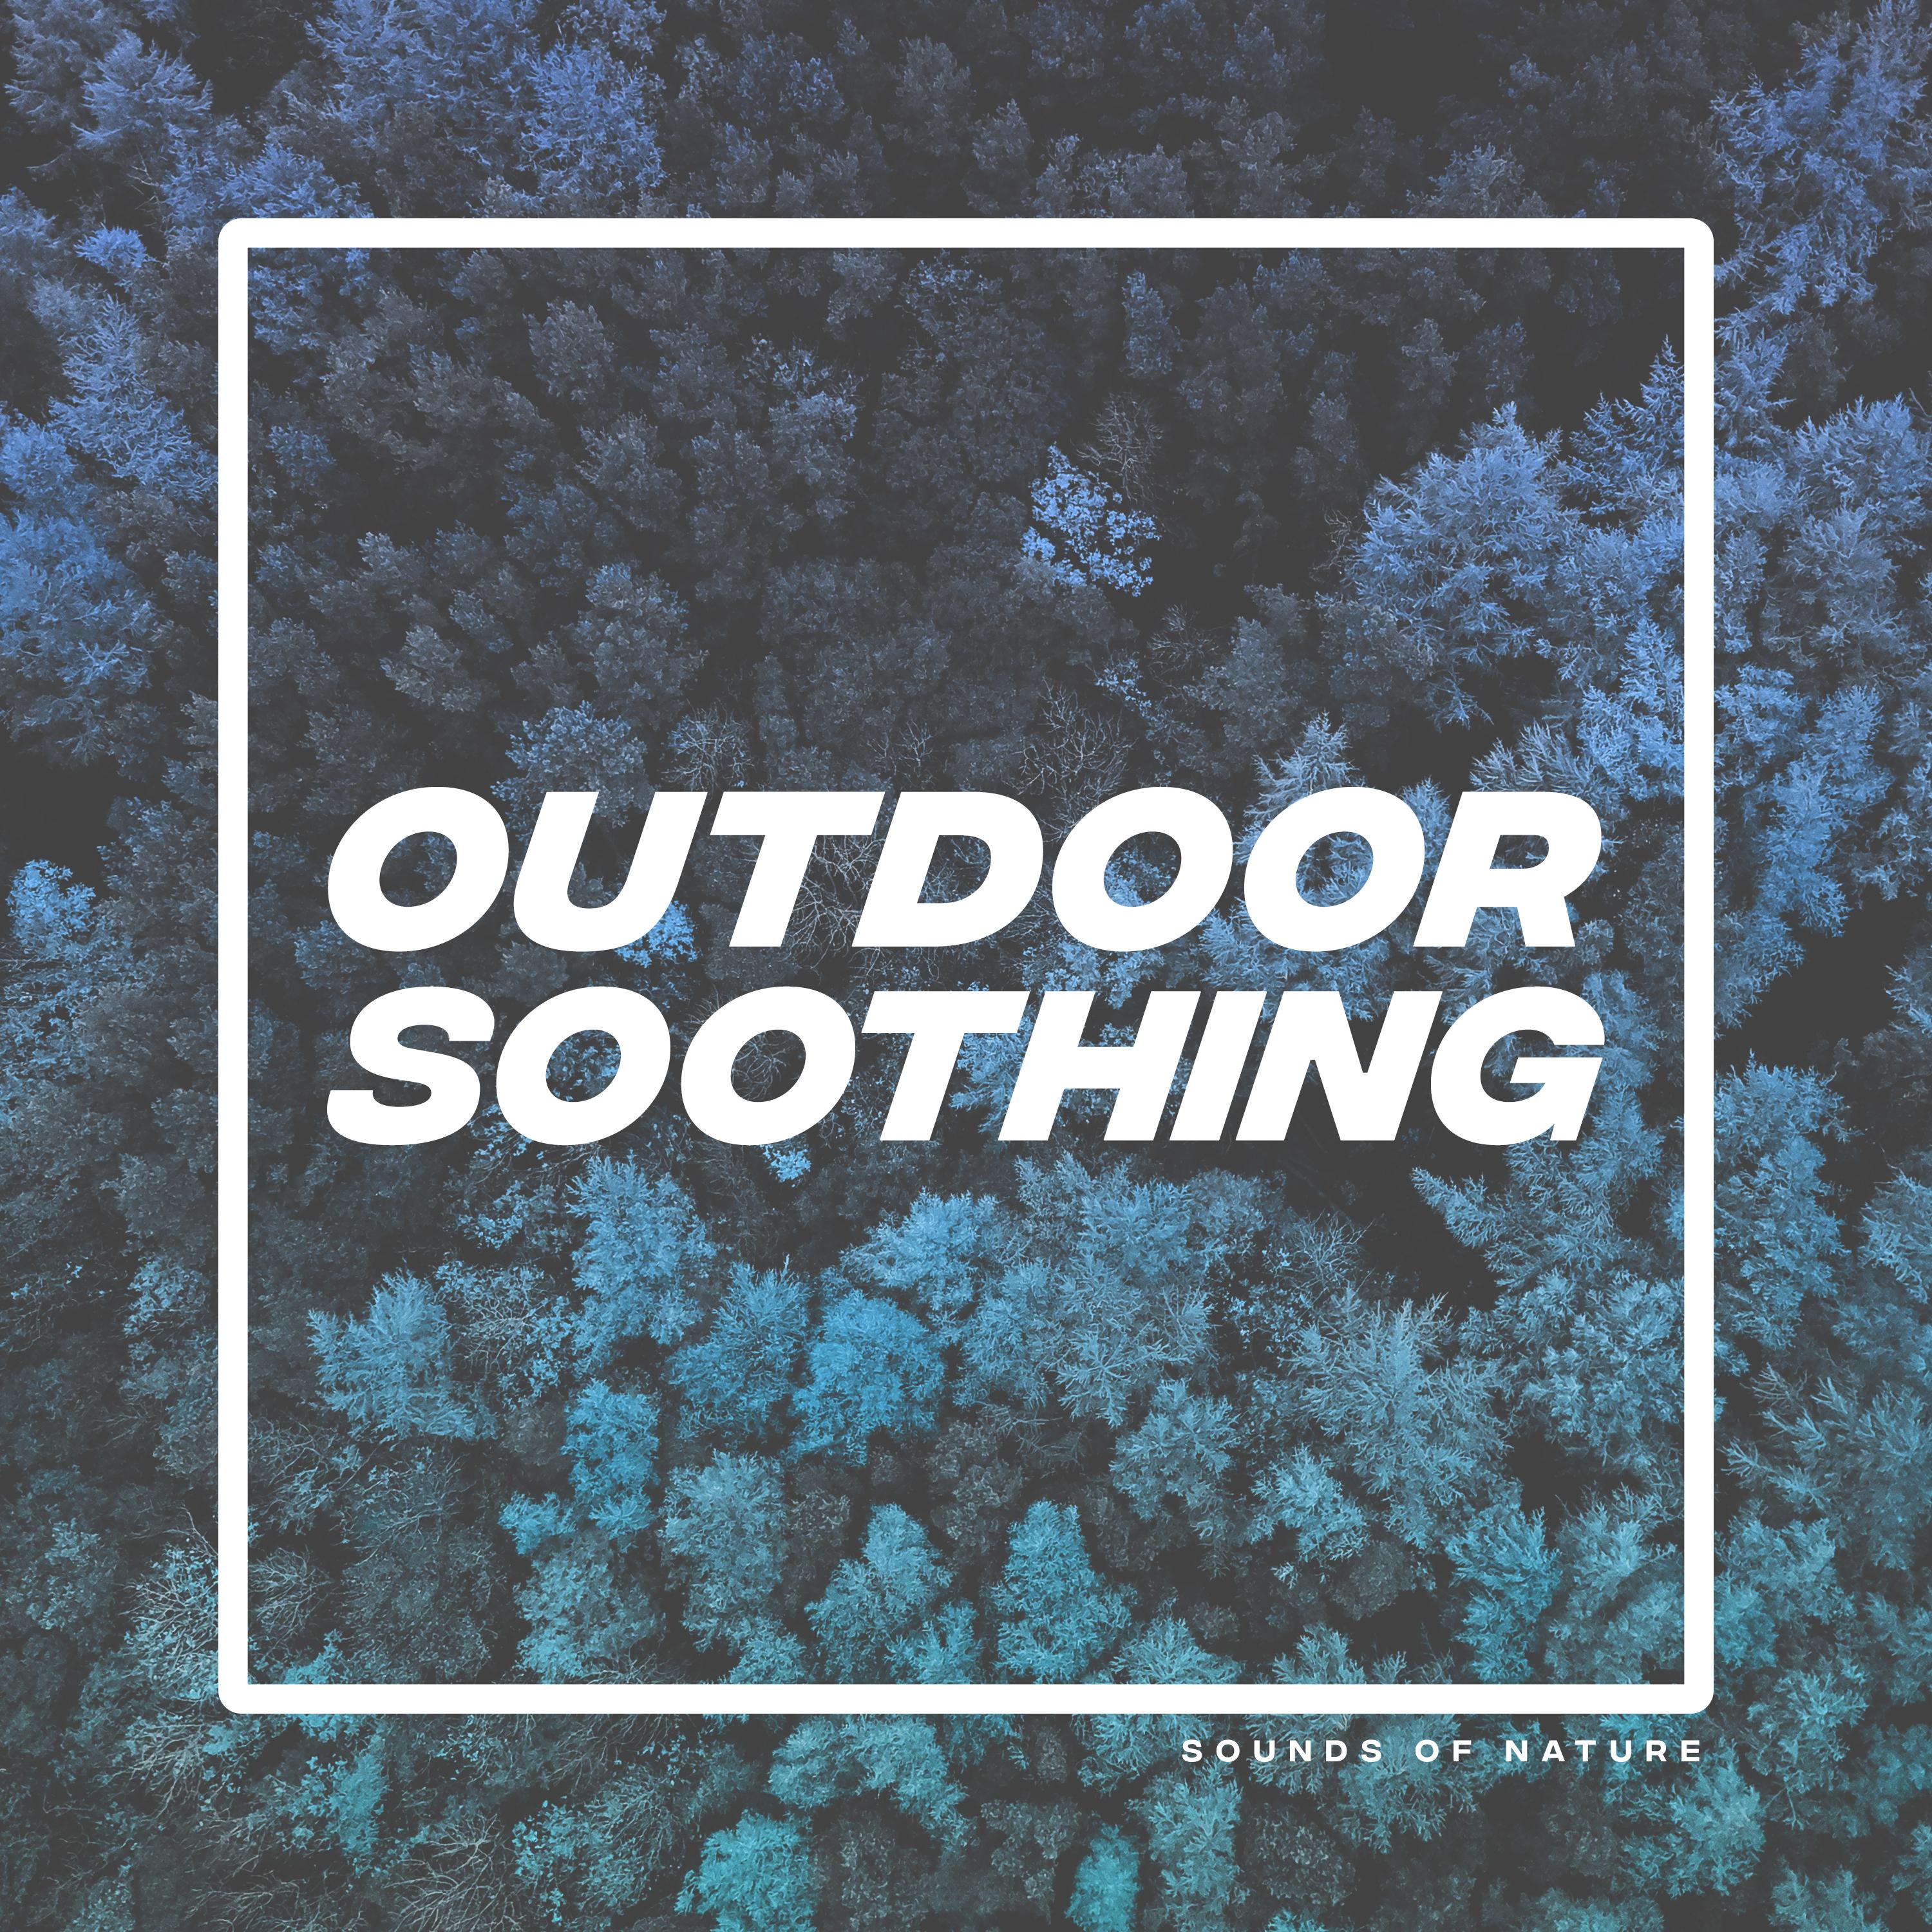 Outdoor Soothing